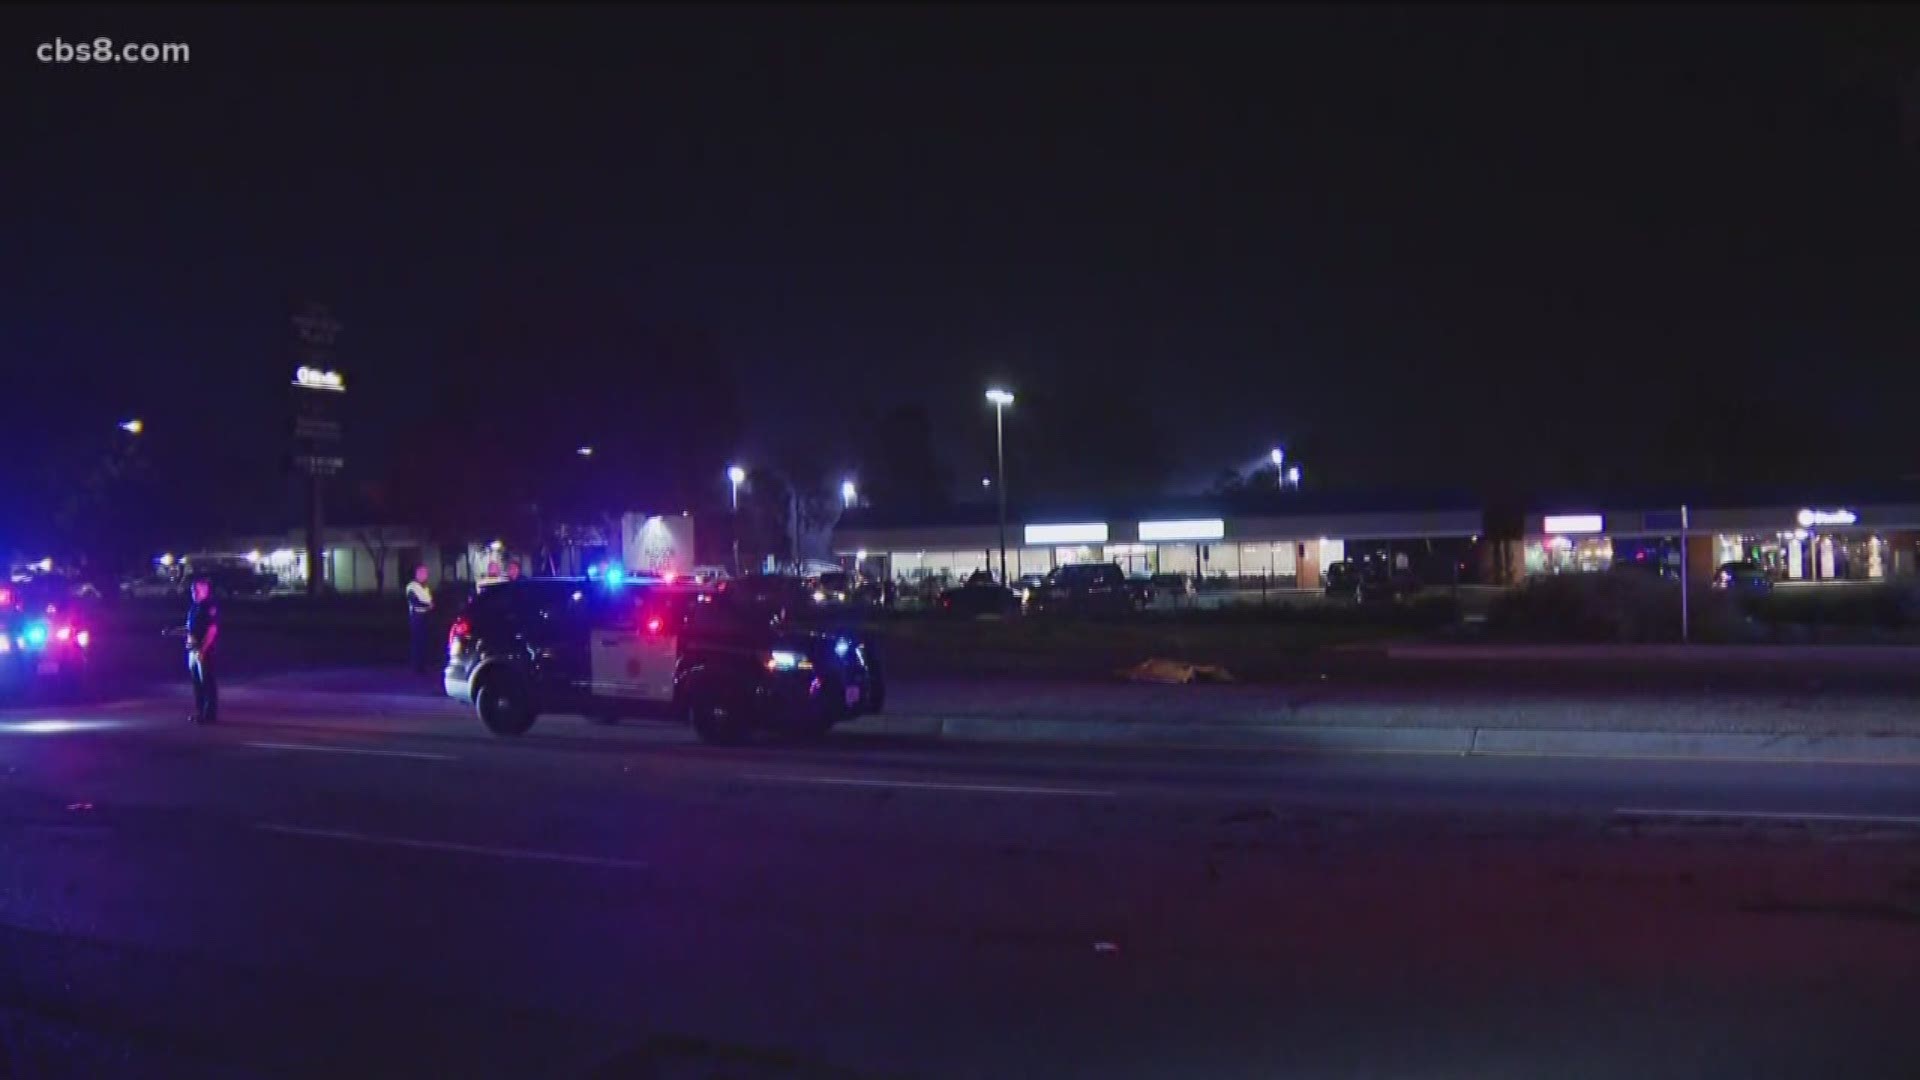 A hit-and-run driver fatally struck a 44-year-old pedestrian in San Diego Wednesday night.